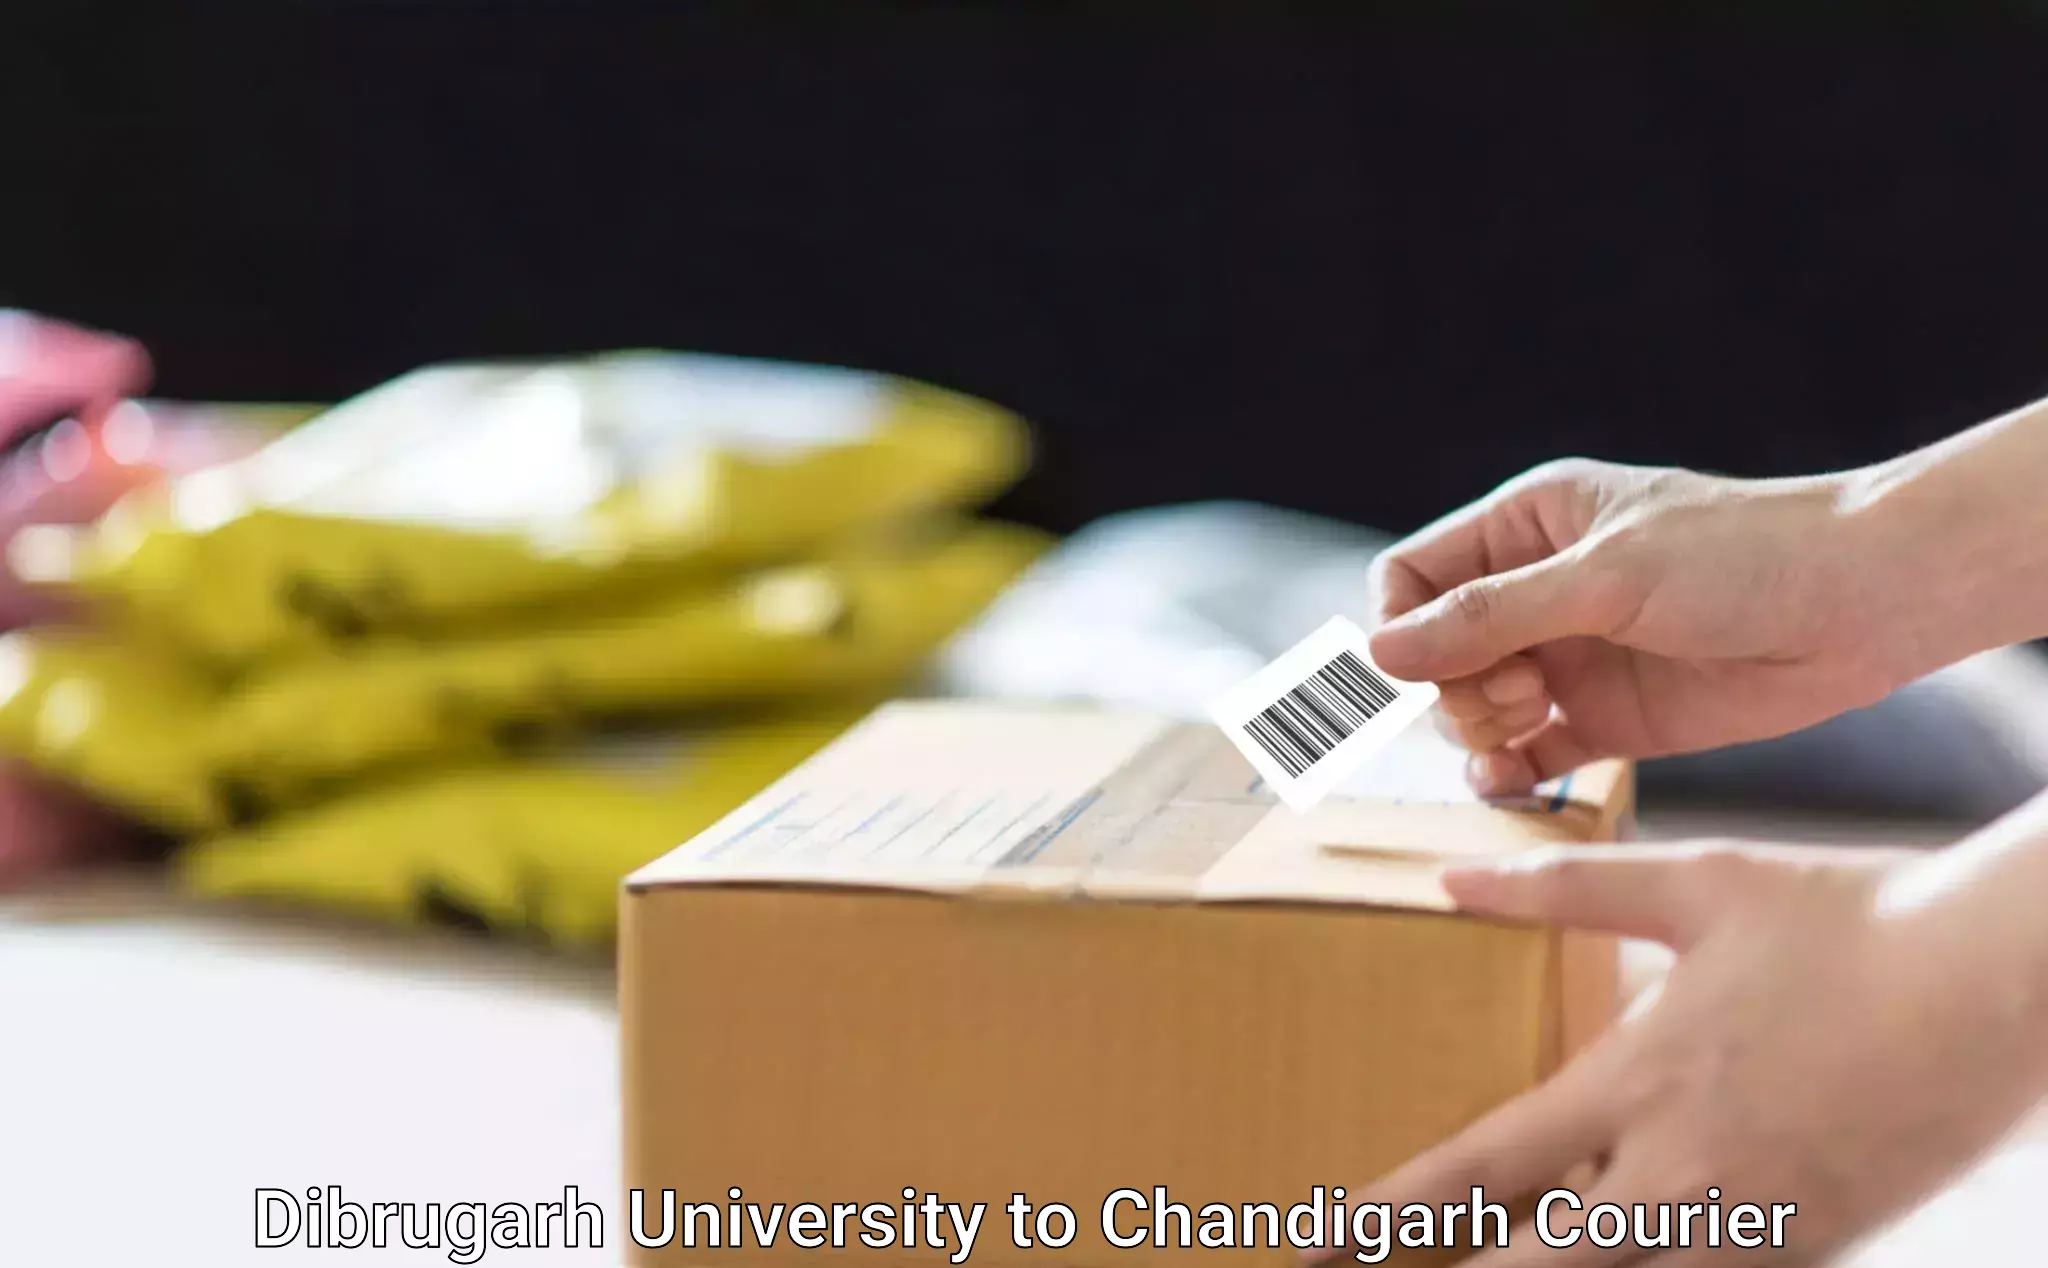 Reliable courier service Dibrugarh University to Kharar